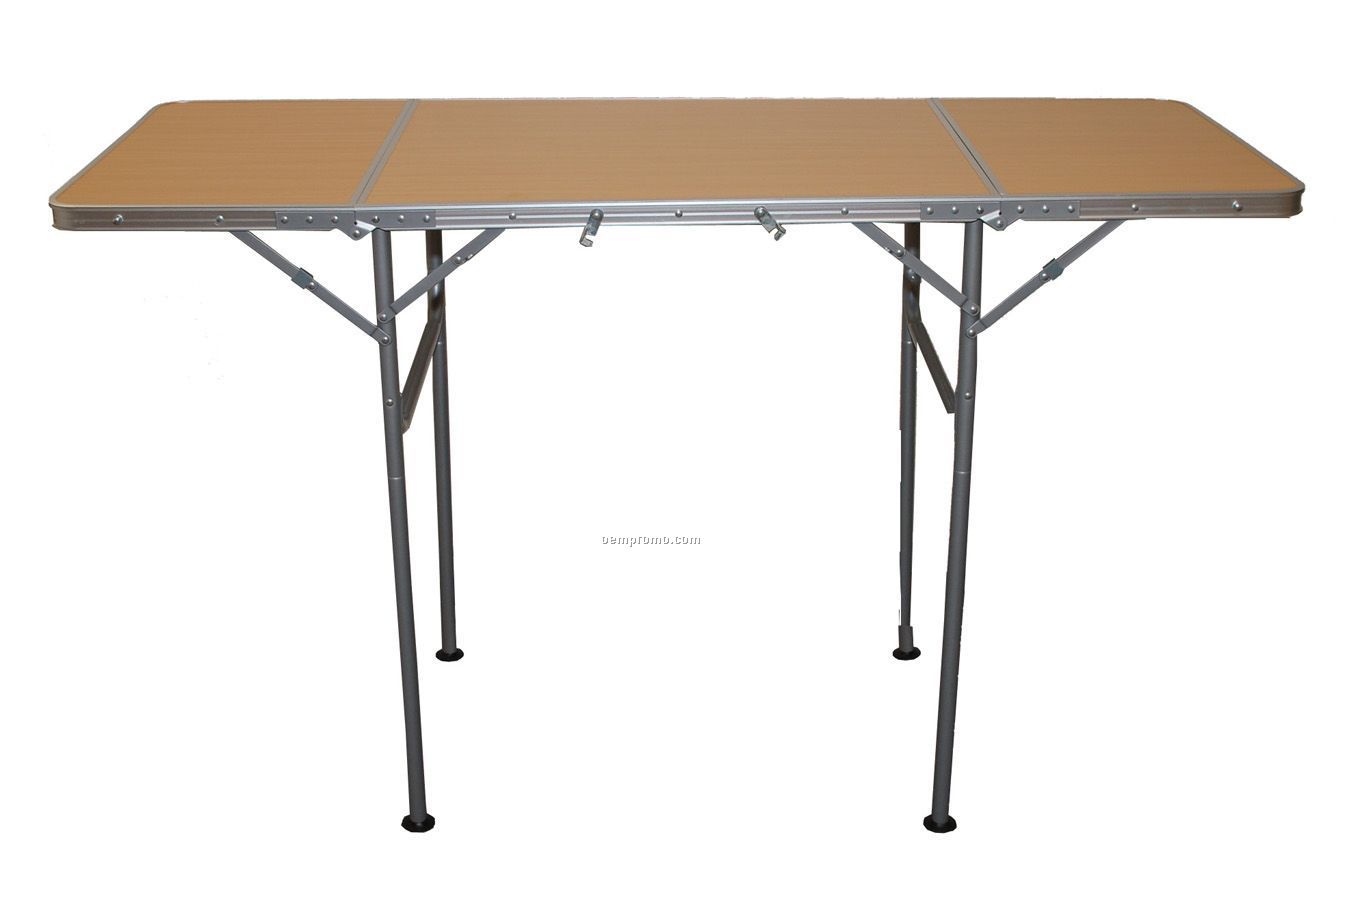 64" Table